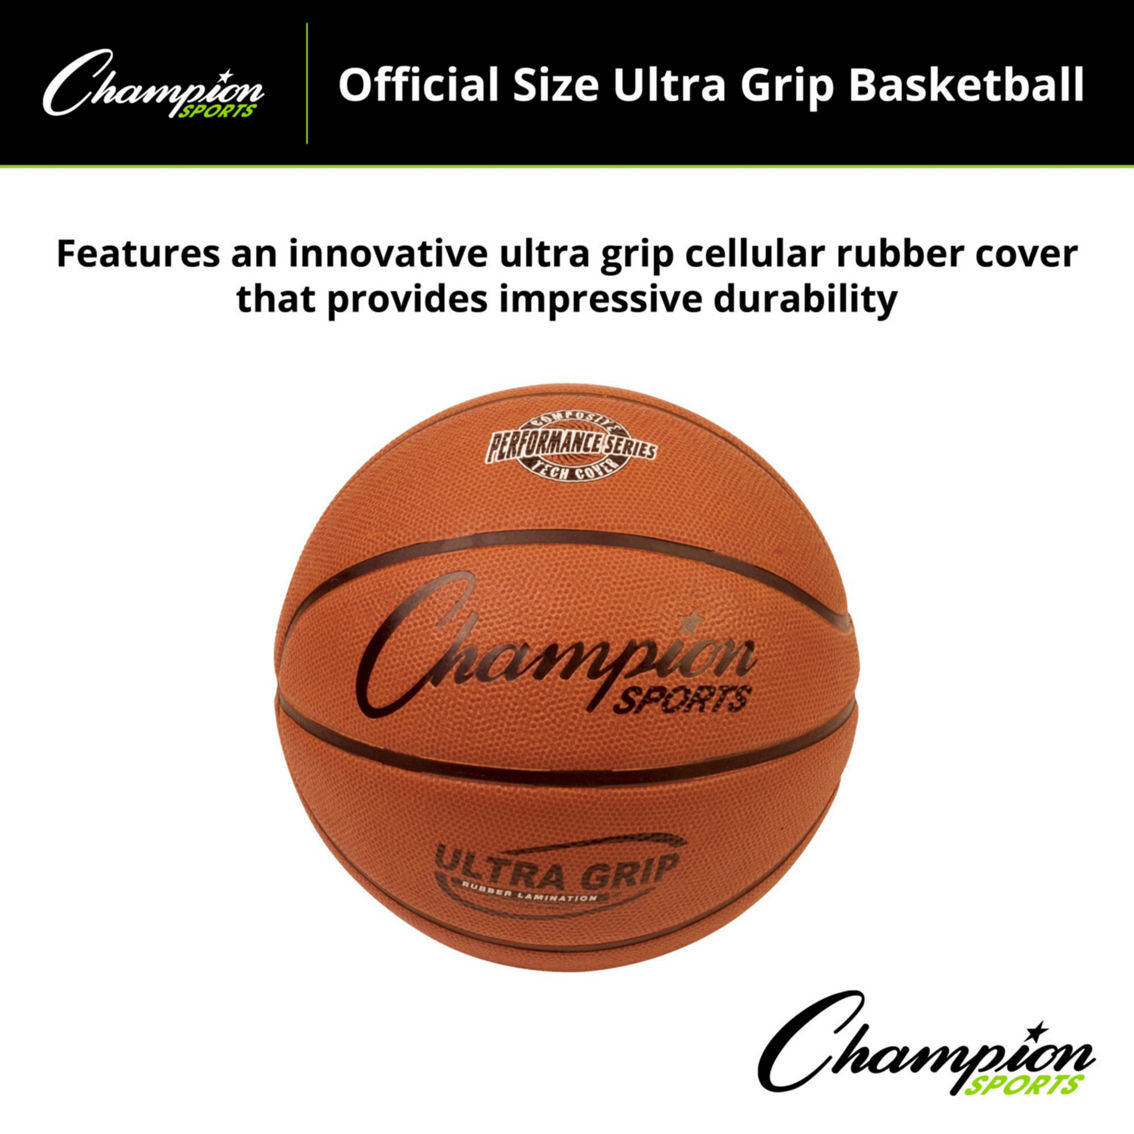 Champion Sports Ultra Grip Rubber Basketball with Bladder, Official Size 7 - Image 2 of 5